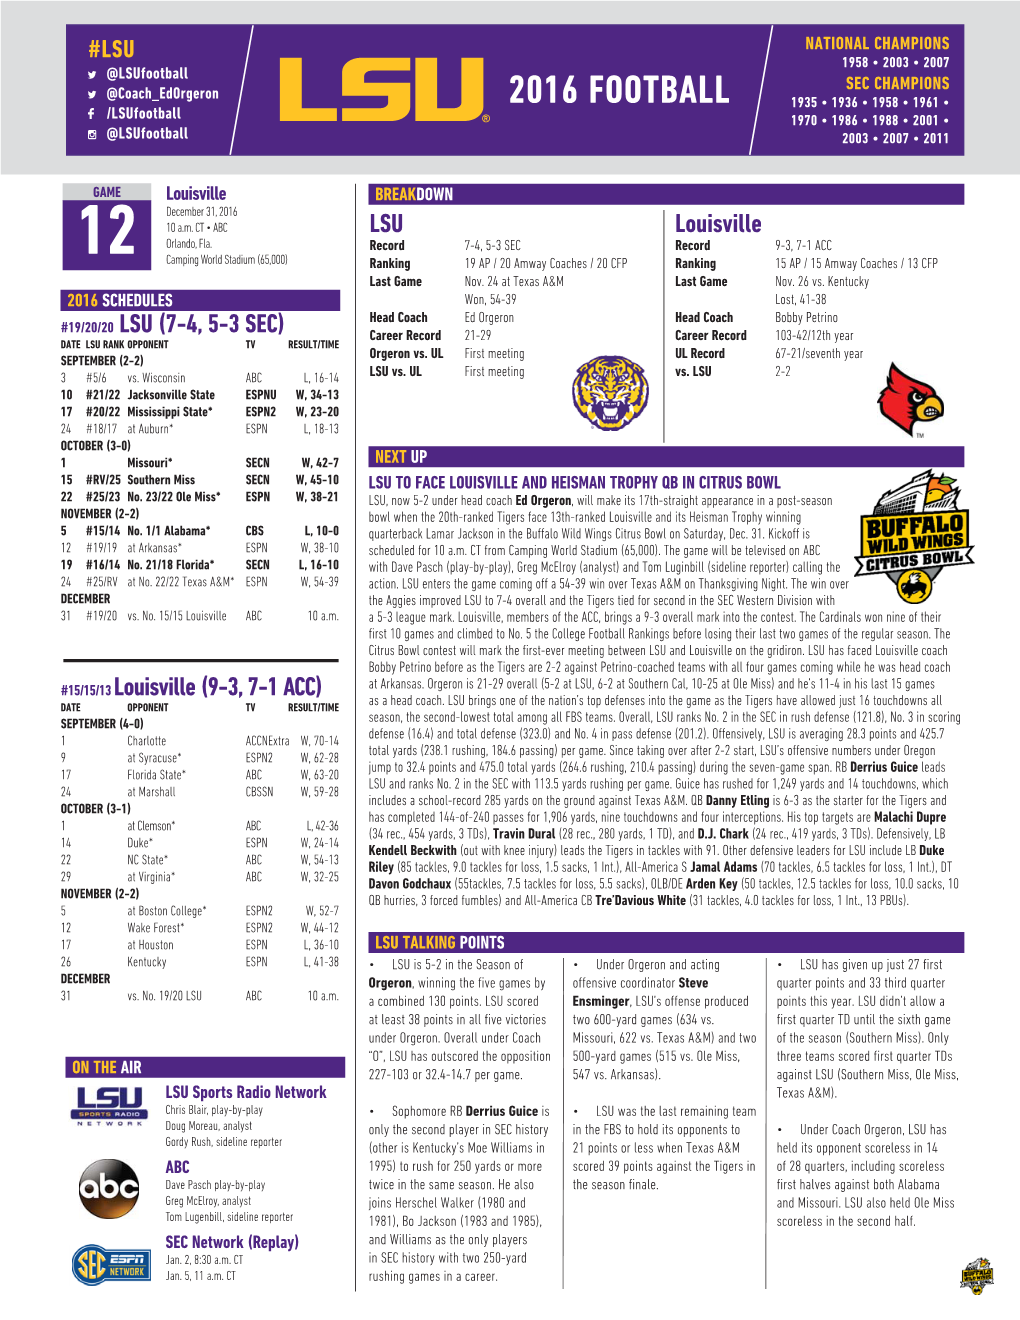 Game 12 Notes at BWW Citrus Bowl.Indd